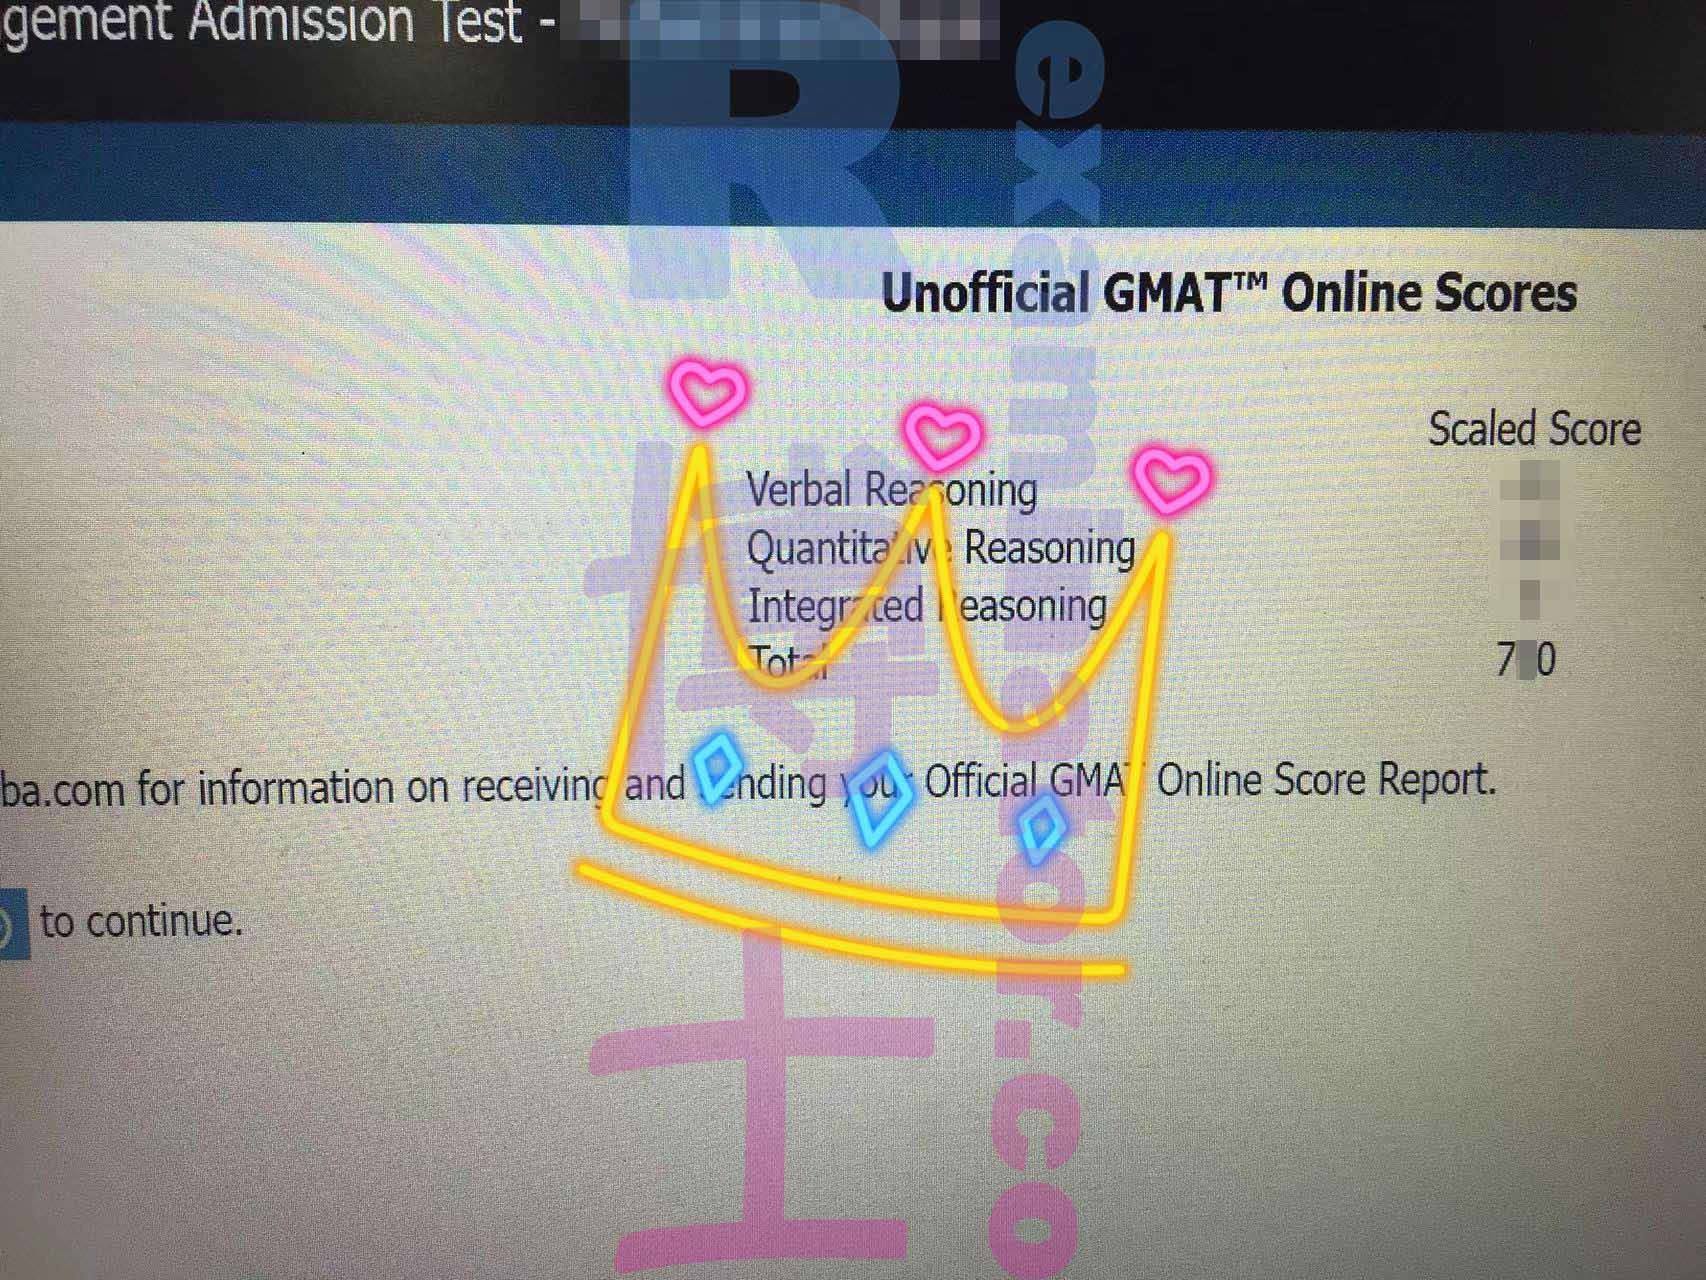 score image for GMAT Cheating success story #393